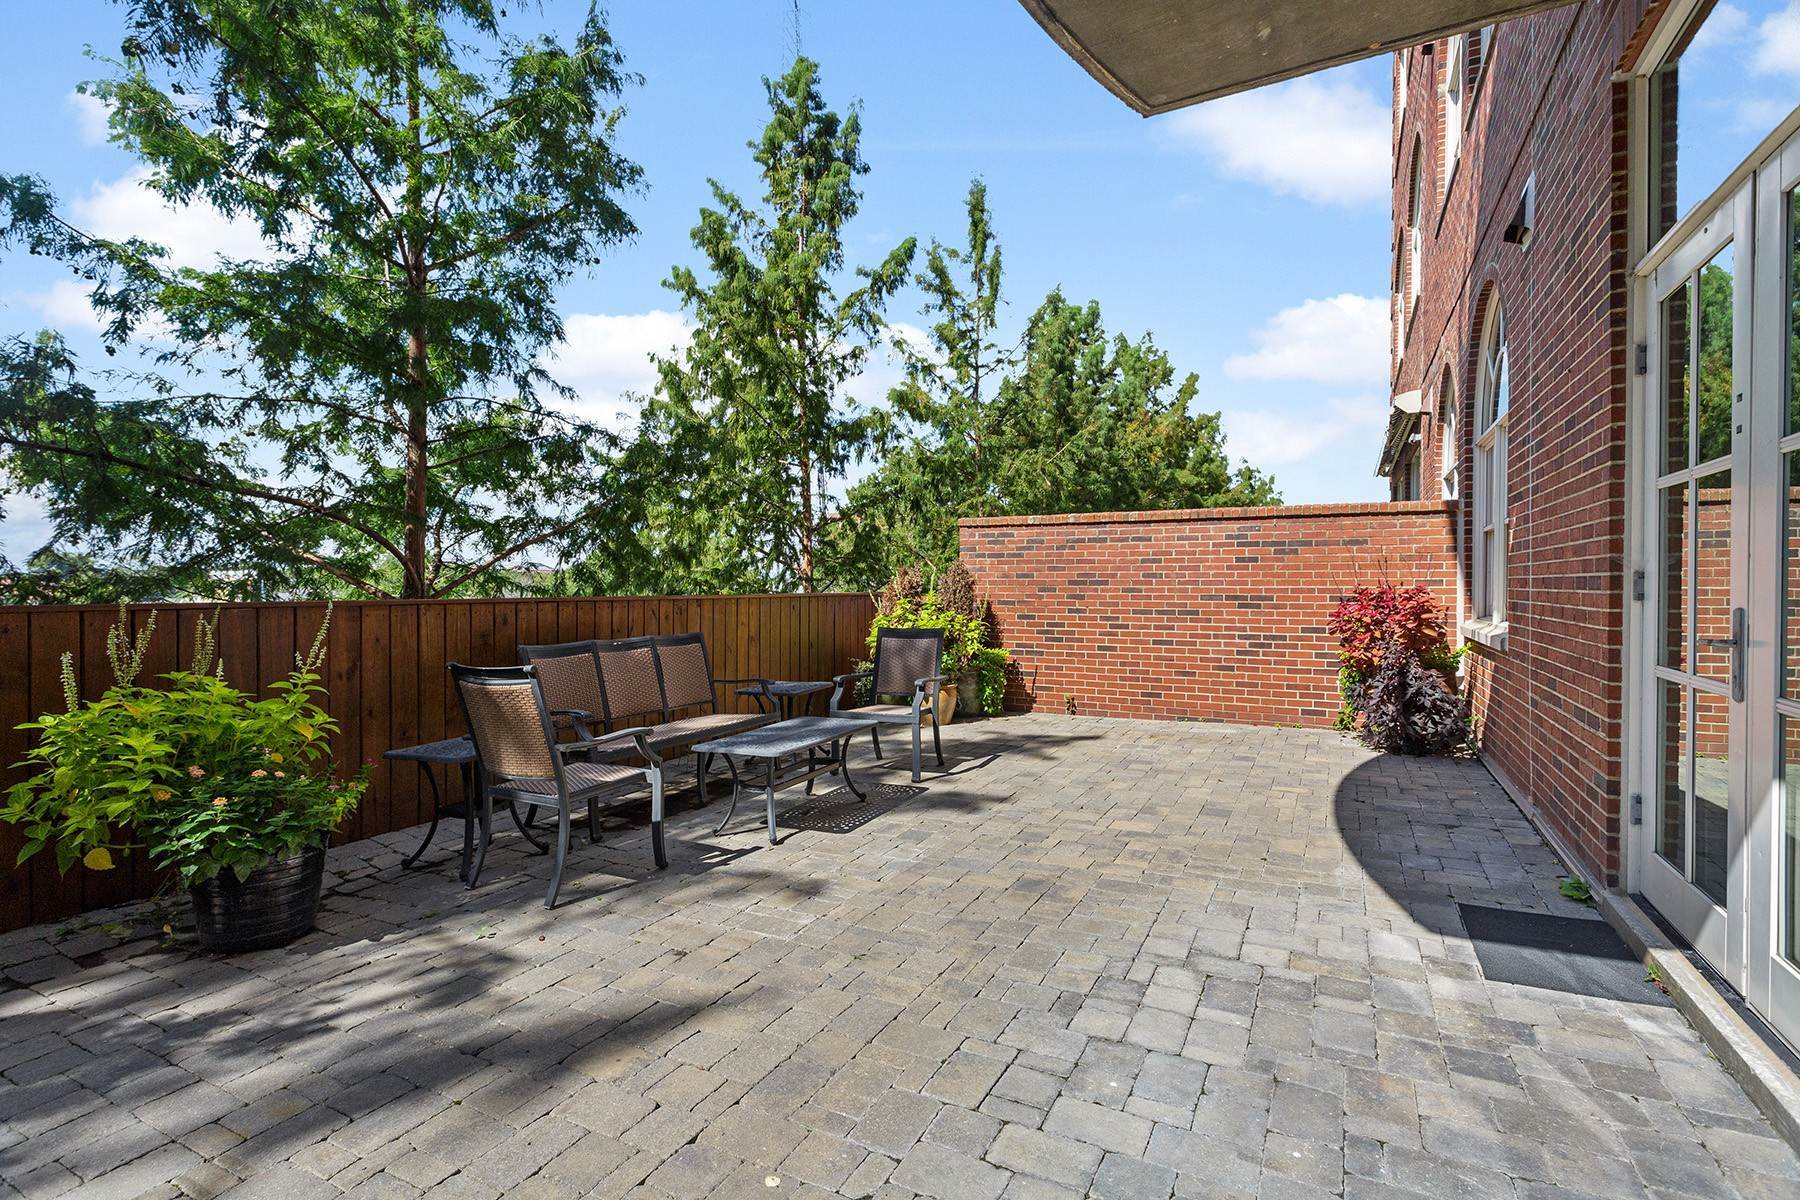 2. Condominiums for Sale at Incredible Opportunity To Acquire A Rare Patio Loft At Mathieson Exchange Lofts 3180 Mathieson Drive, No. 505 Atlanta, Georgia 30305 United States